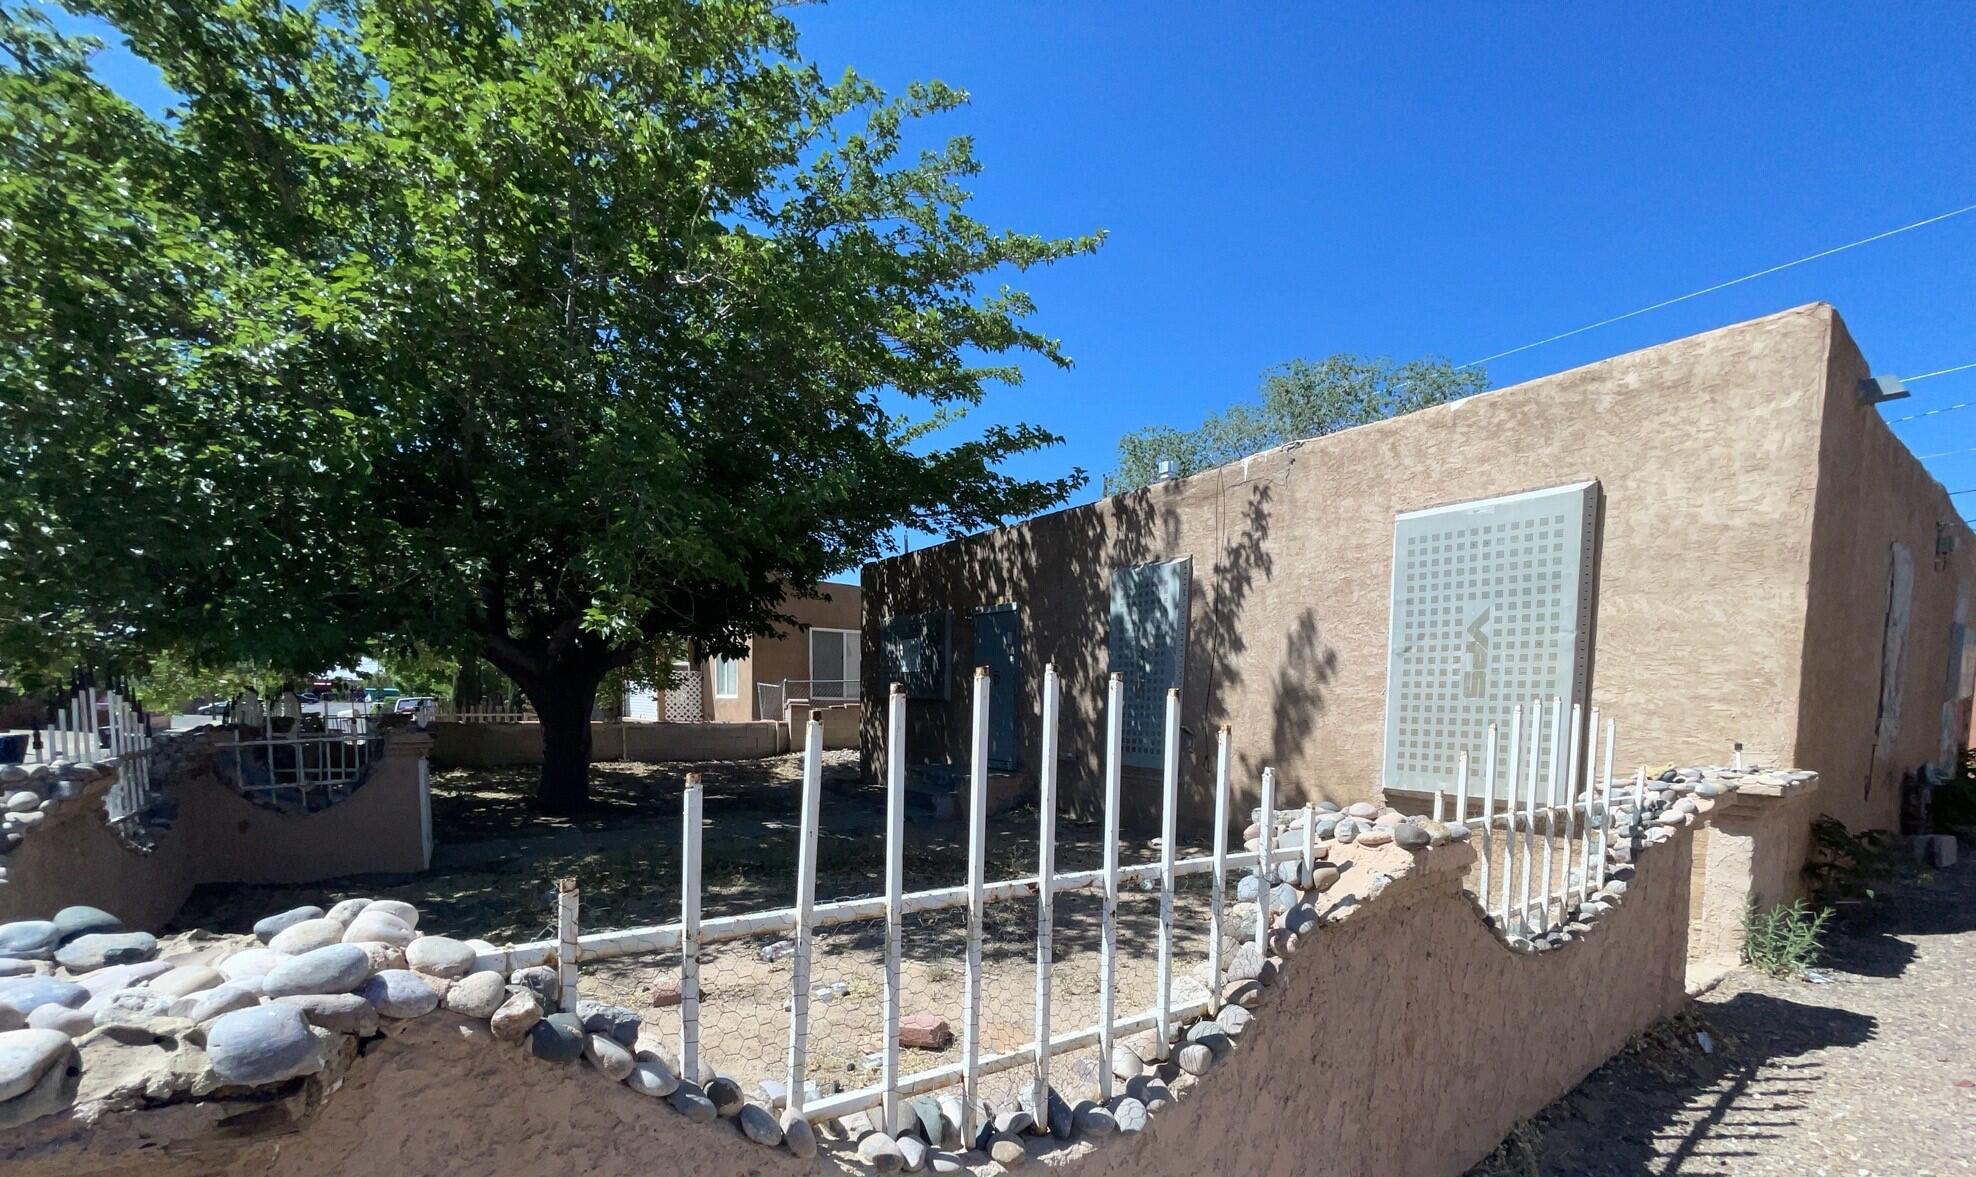 Here is another great opportunity for the savvy investor or home owner looking for some sweat equity. The home is located in the center of the city, close to the major highways, schools and stores. The home features a large lot, 2 bedrooms and one bath.